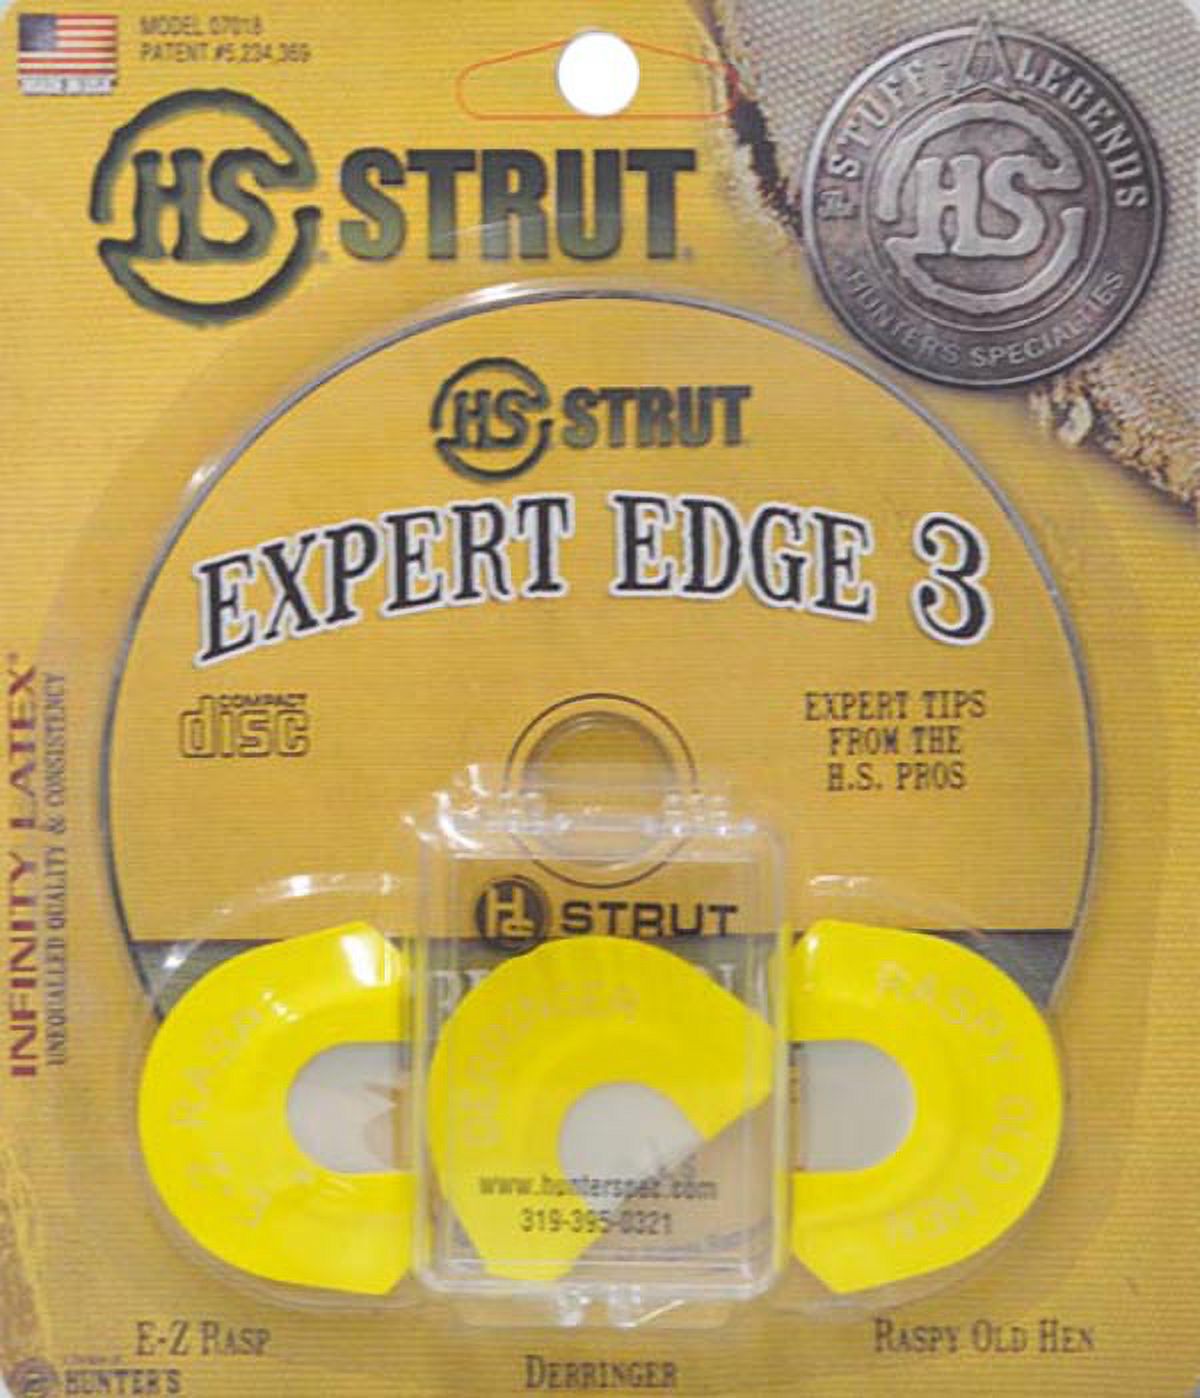 H.S. Strut Expert Edge 3 Turkey Diaphragm Combo Pack by Hunter's Specialties - image 2 of 2